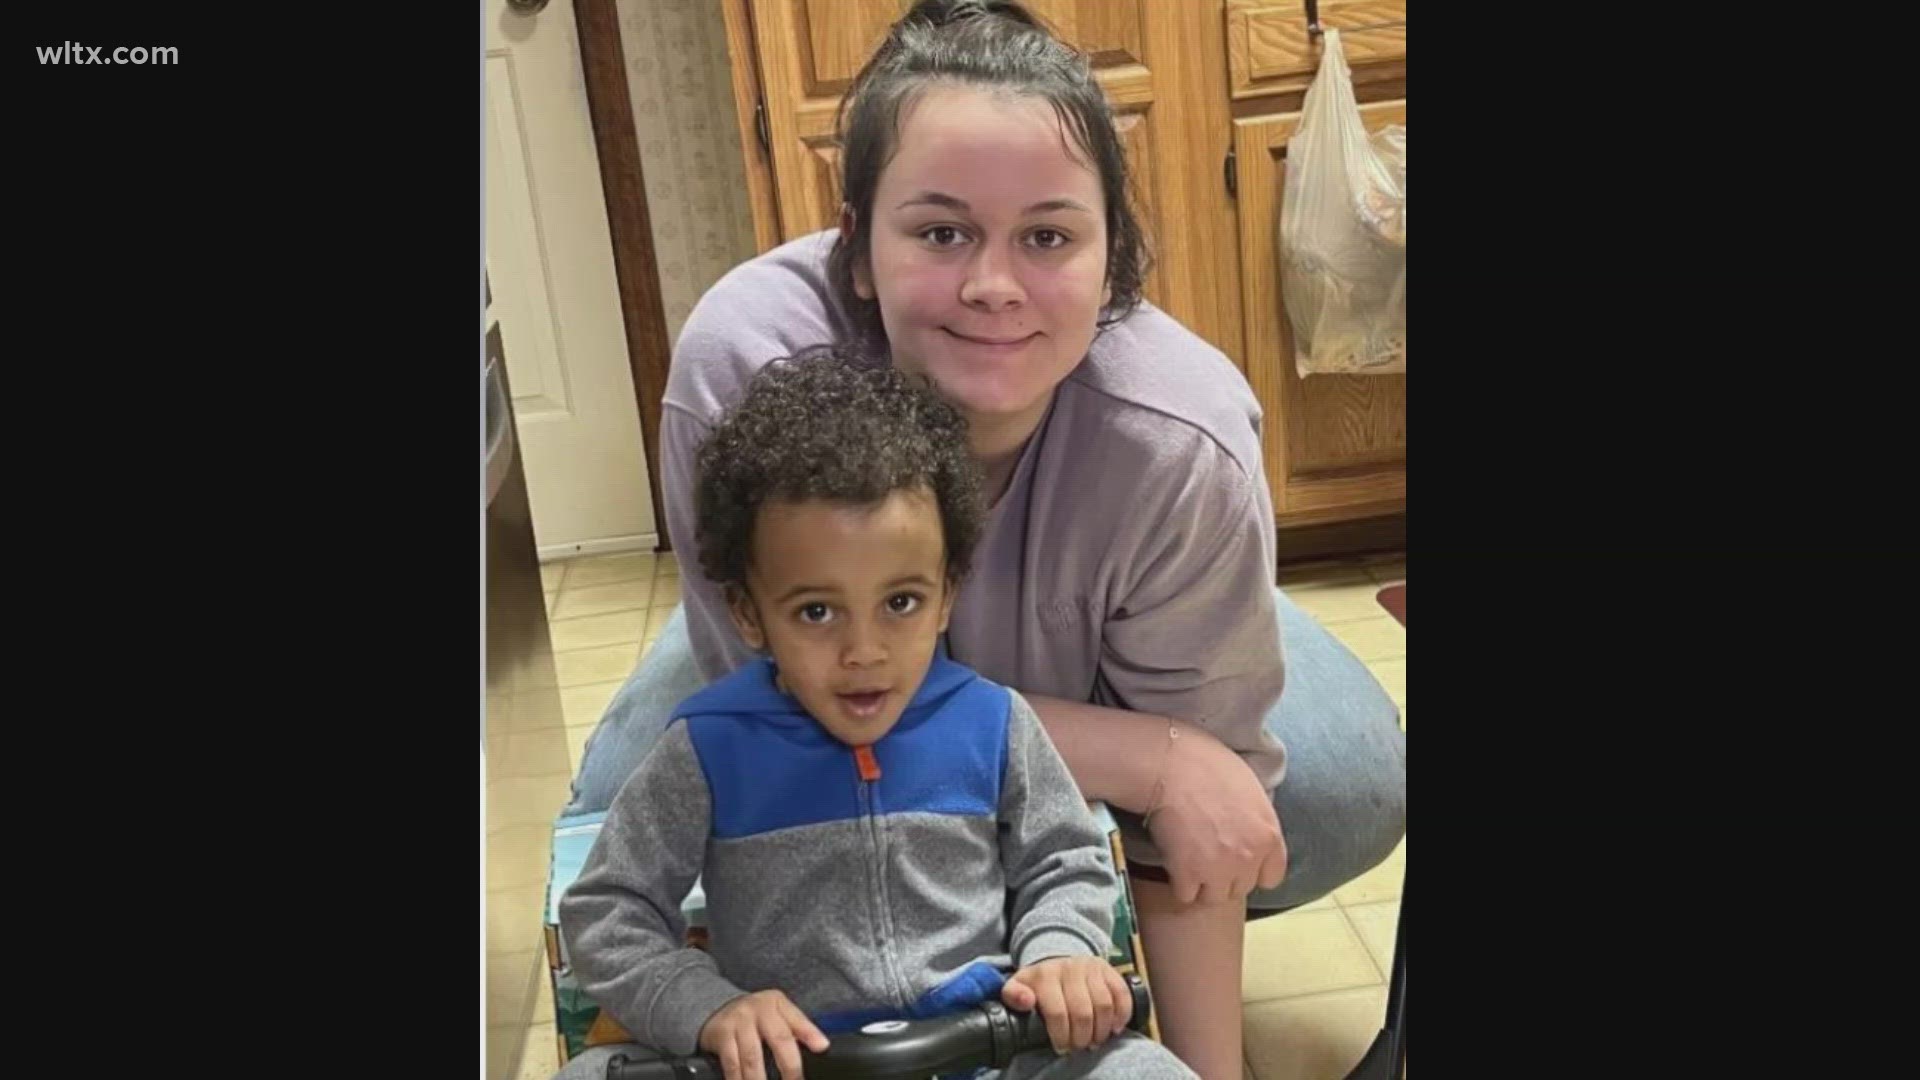 Sumter Police said that officers searched the area surrounding the home of 20-year-old Sophia Van Dam and 2-year-old Matayo Van Dam on Thursday.